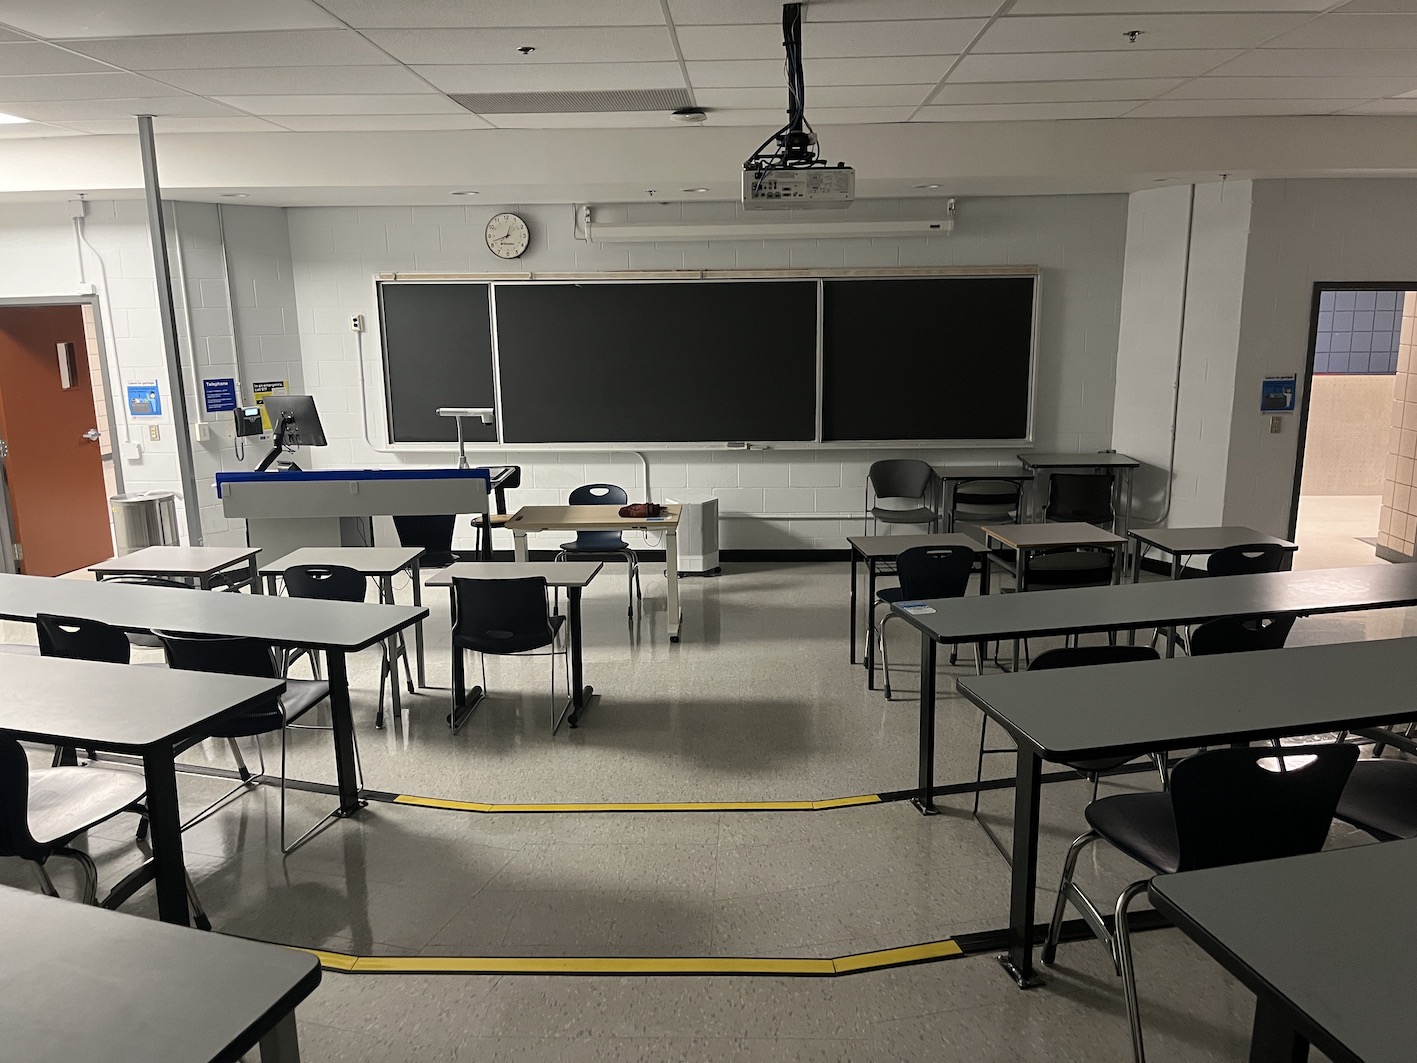 Instructor's view of classroom in Eric Palin Hall at Ryerson after renovations 